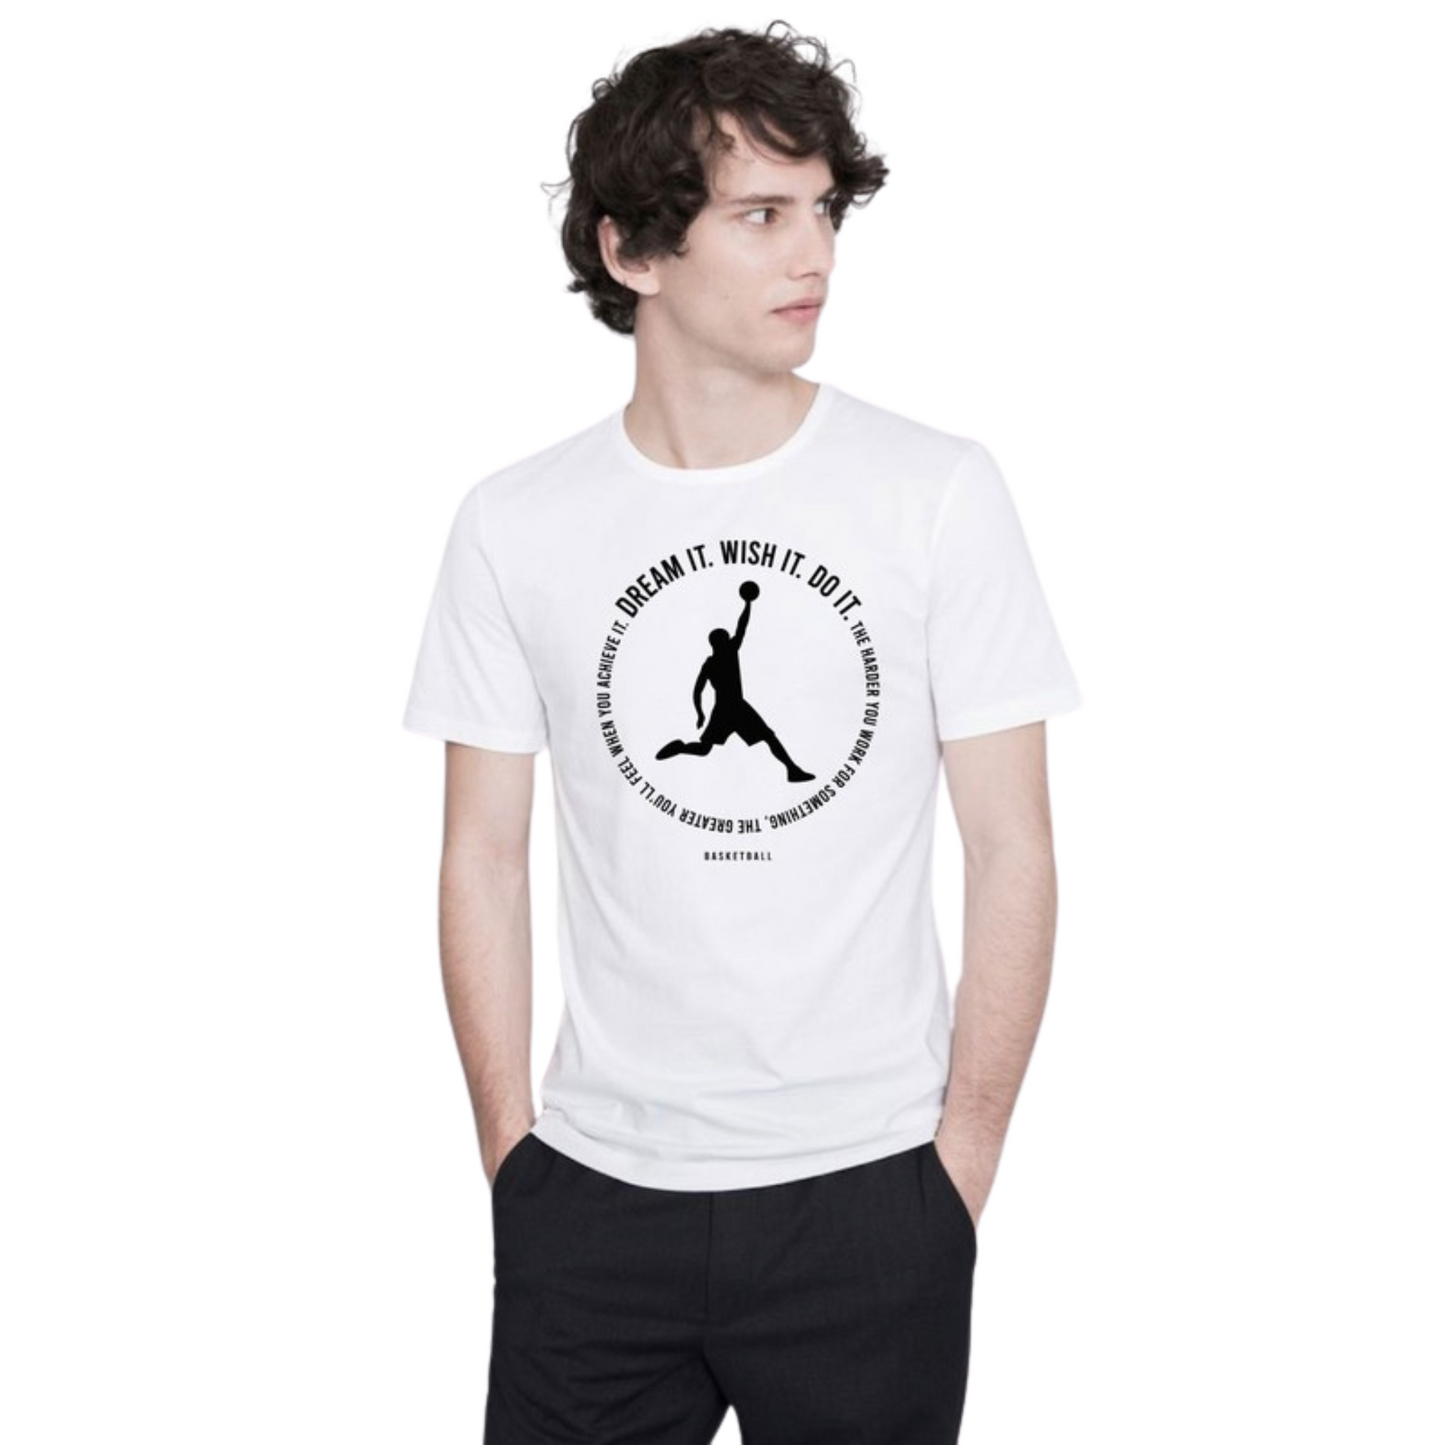 No Brand Basketball Graphic Tee (2 Colors S-XL)